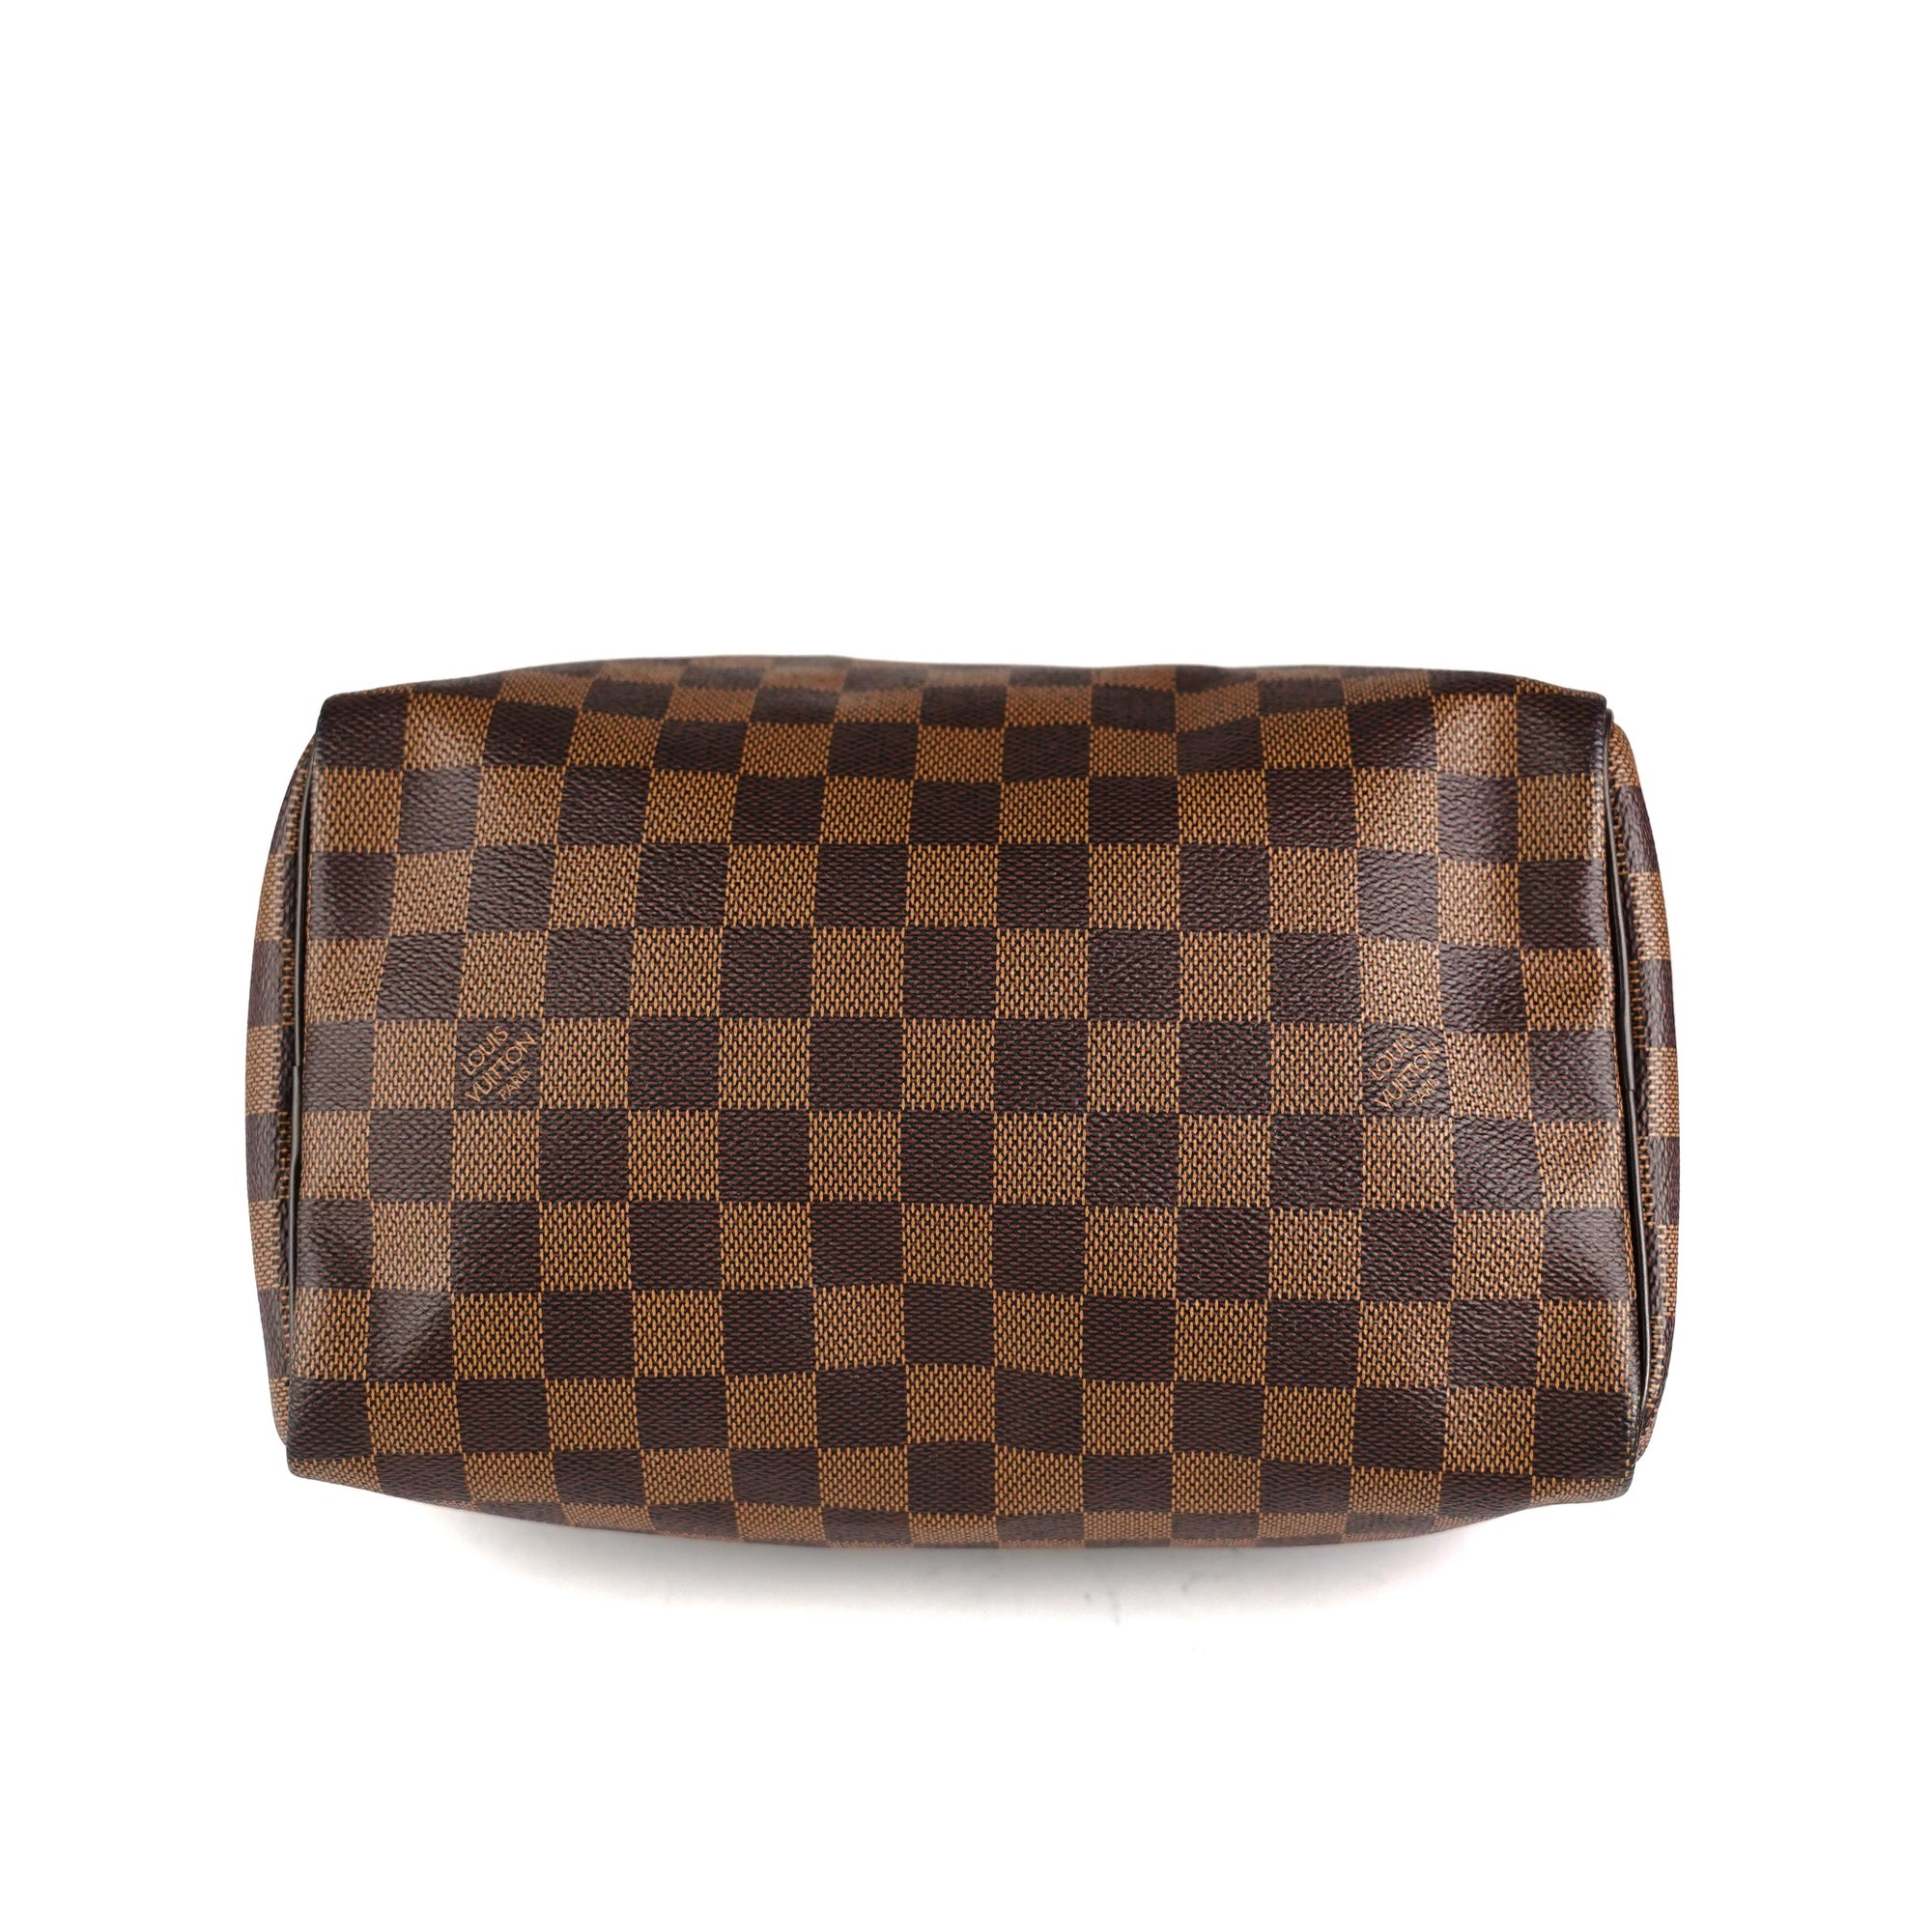 Too Good To Be Threw Designer Fashion and Furniture - Luxury Handbag 101  --> Louis Vuitton Azur Speedy The Damier canvas pattern was introduced and  trademarked in 1888. The first speedy was